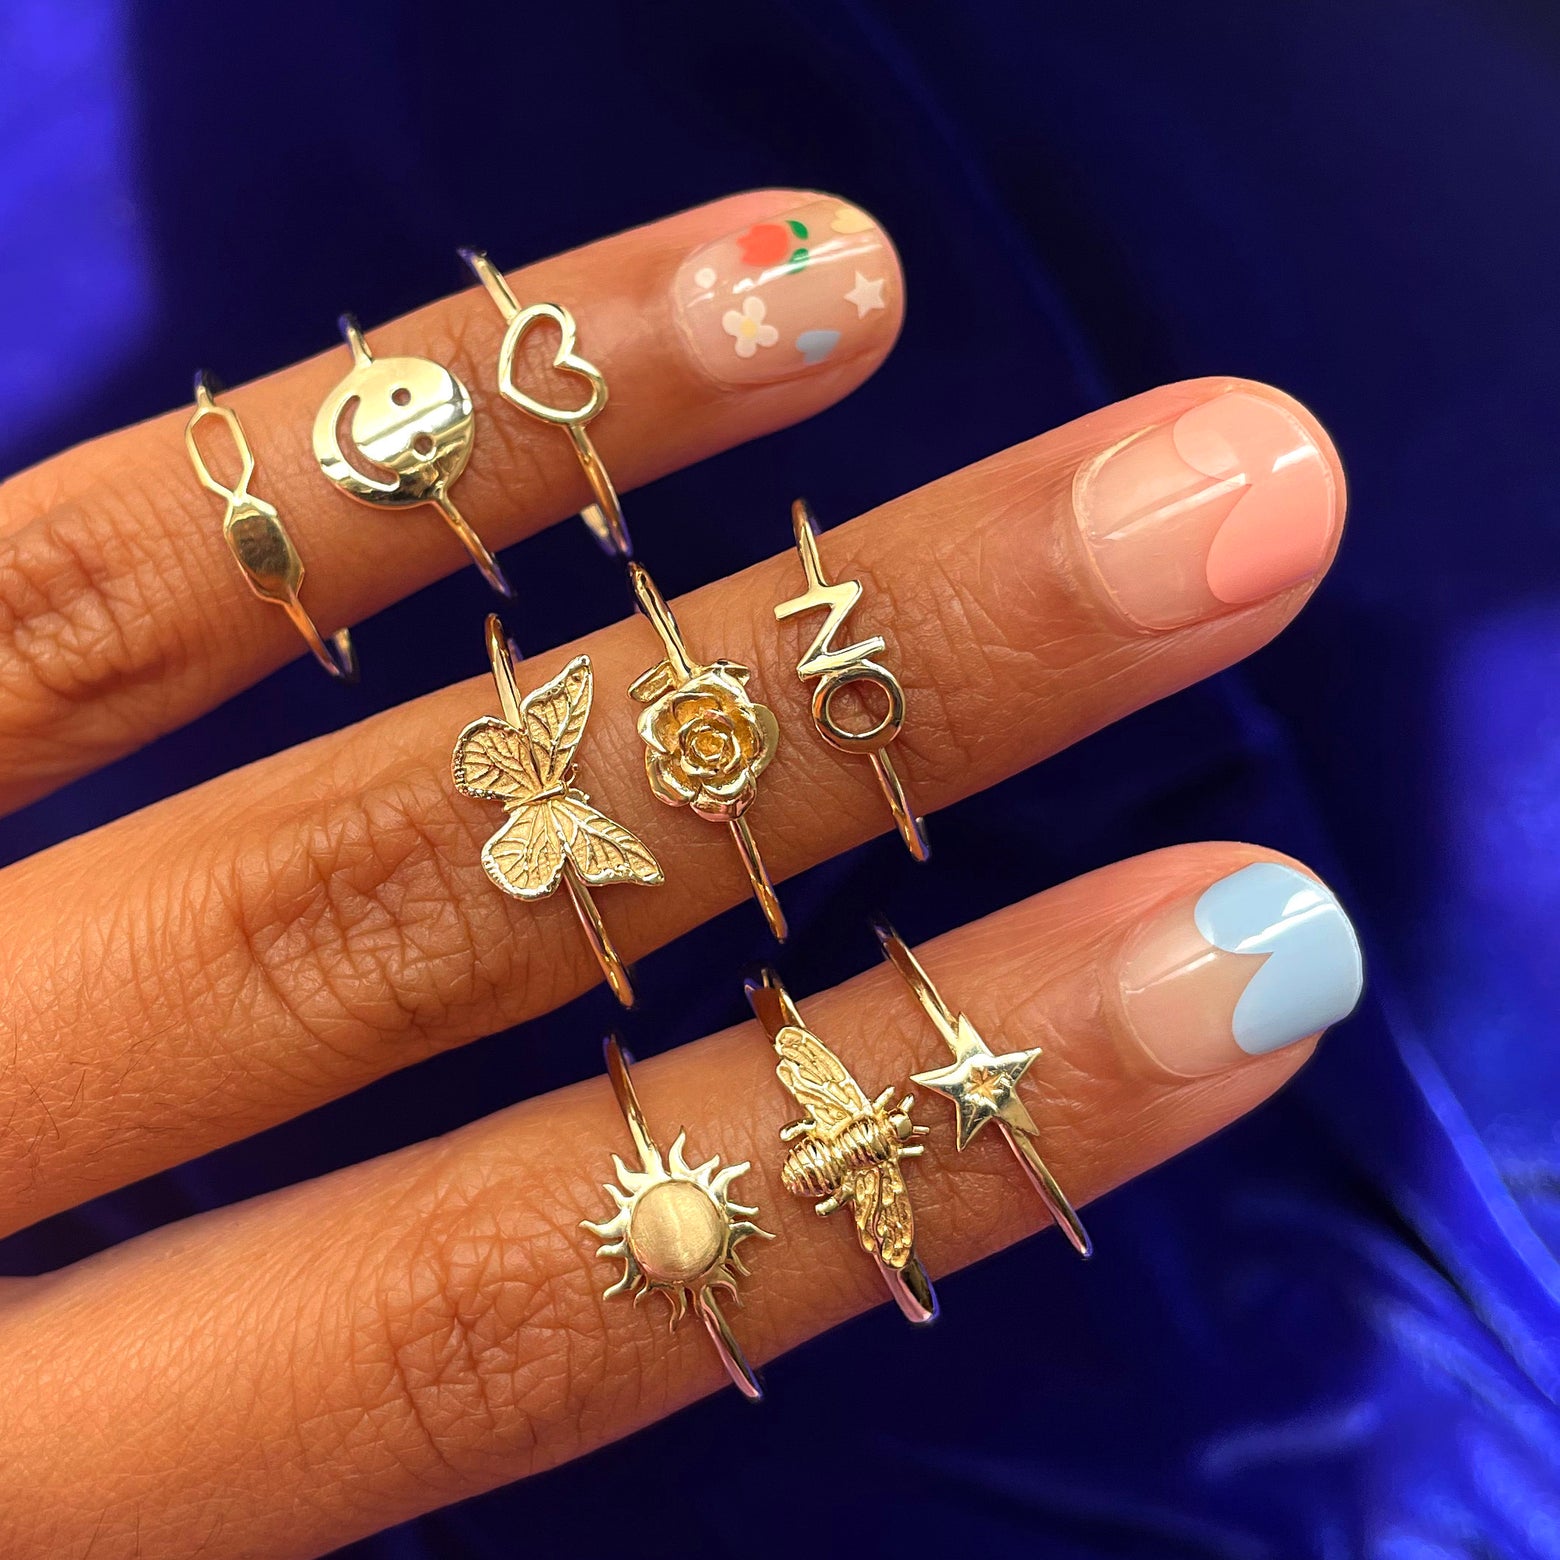 Close up view of three fingers with a colorful manicure wearing various Automic Gold rings including a Butterfly Ring